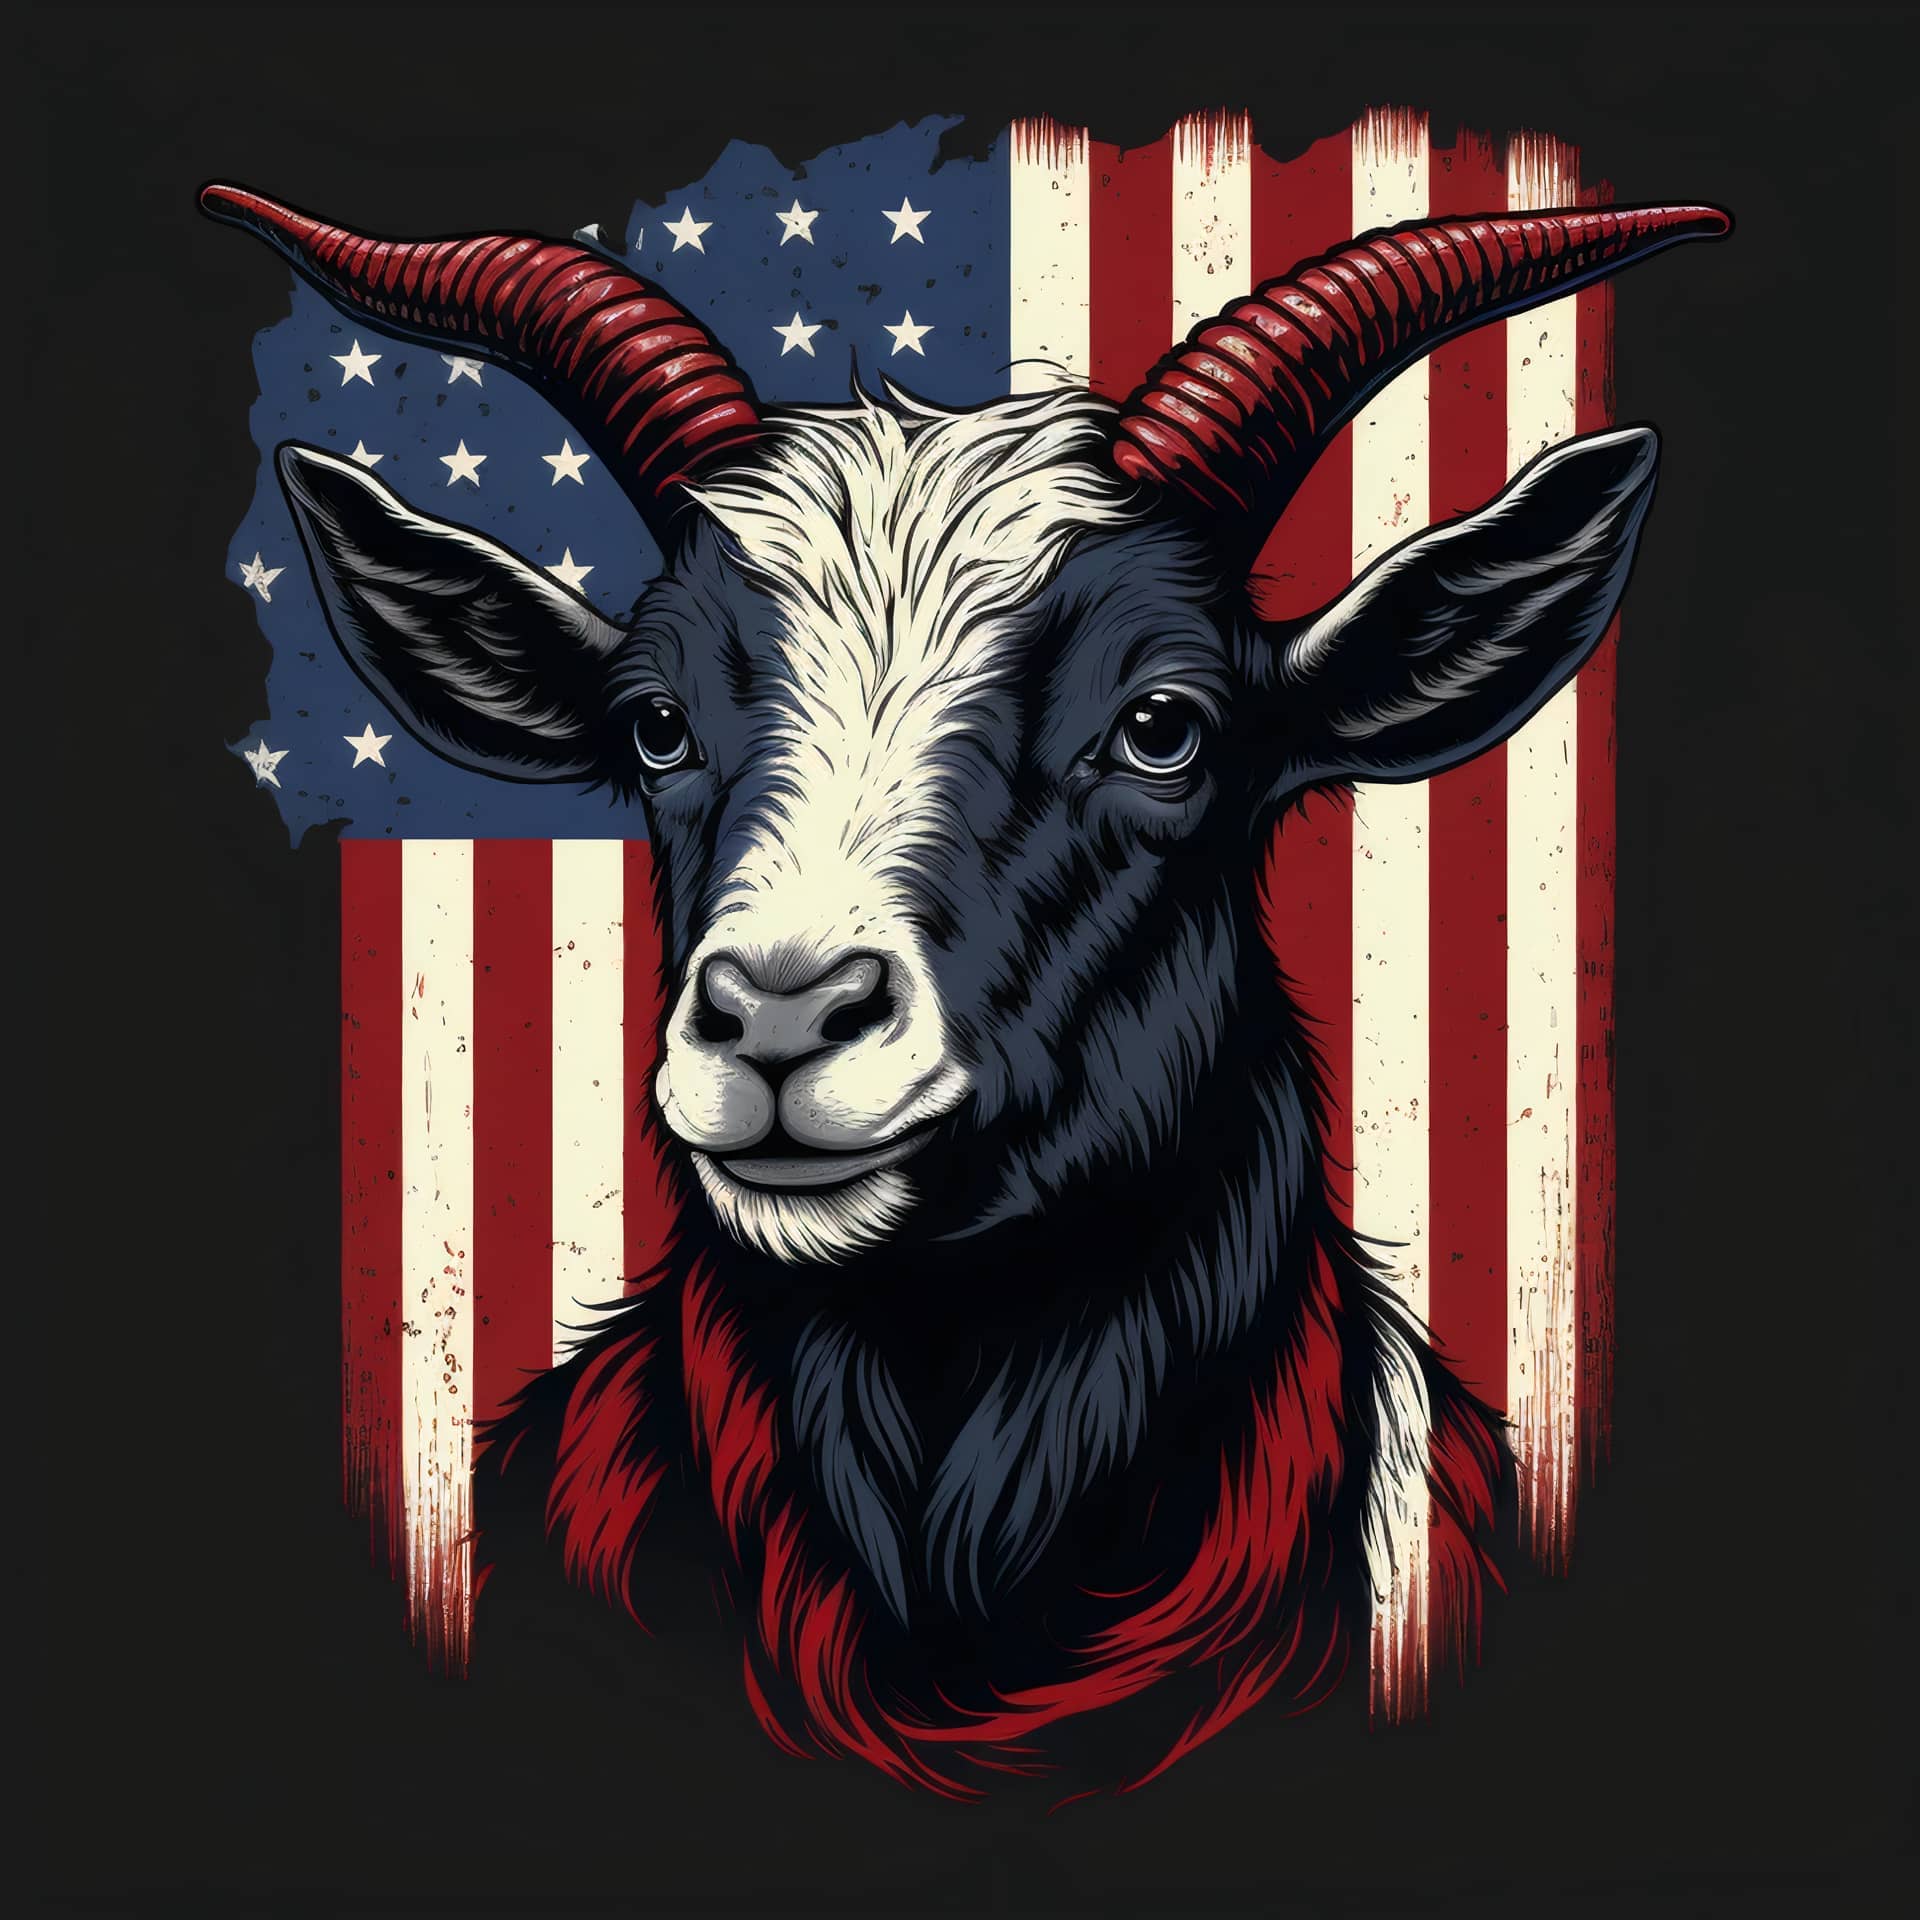 Facebook profile pic goat design with american flag